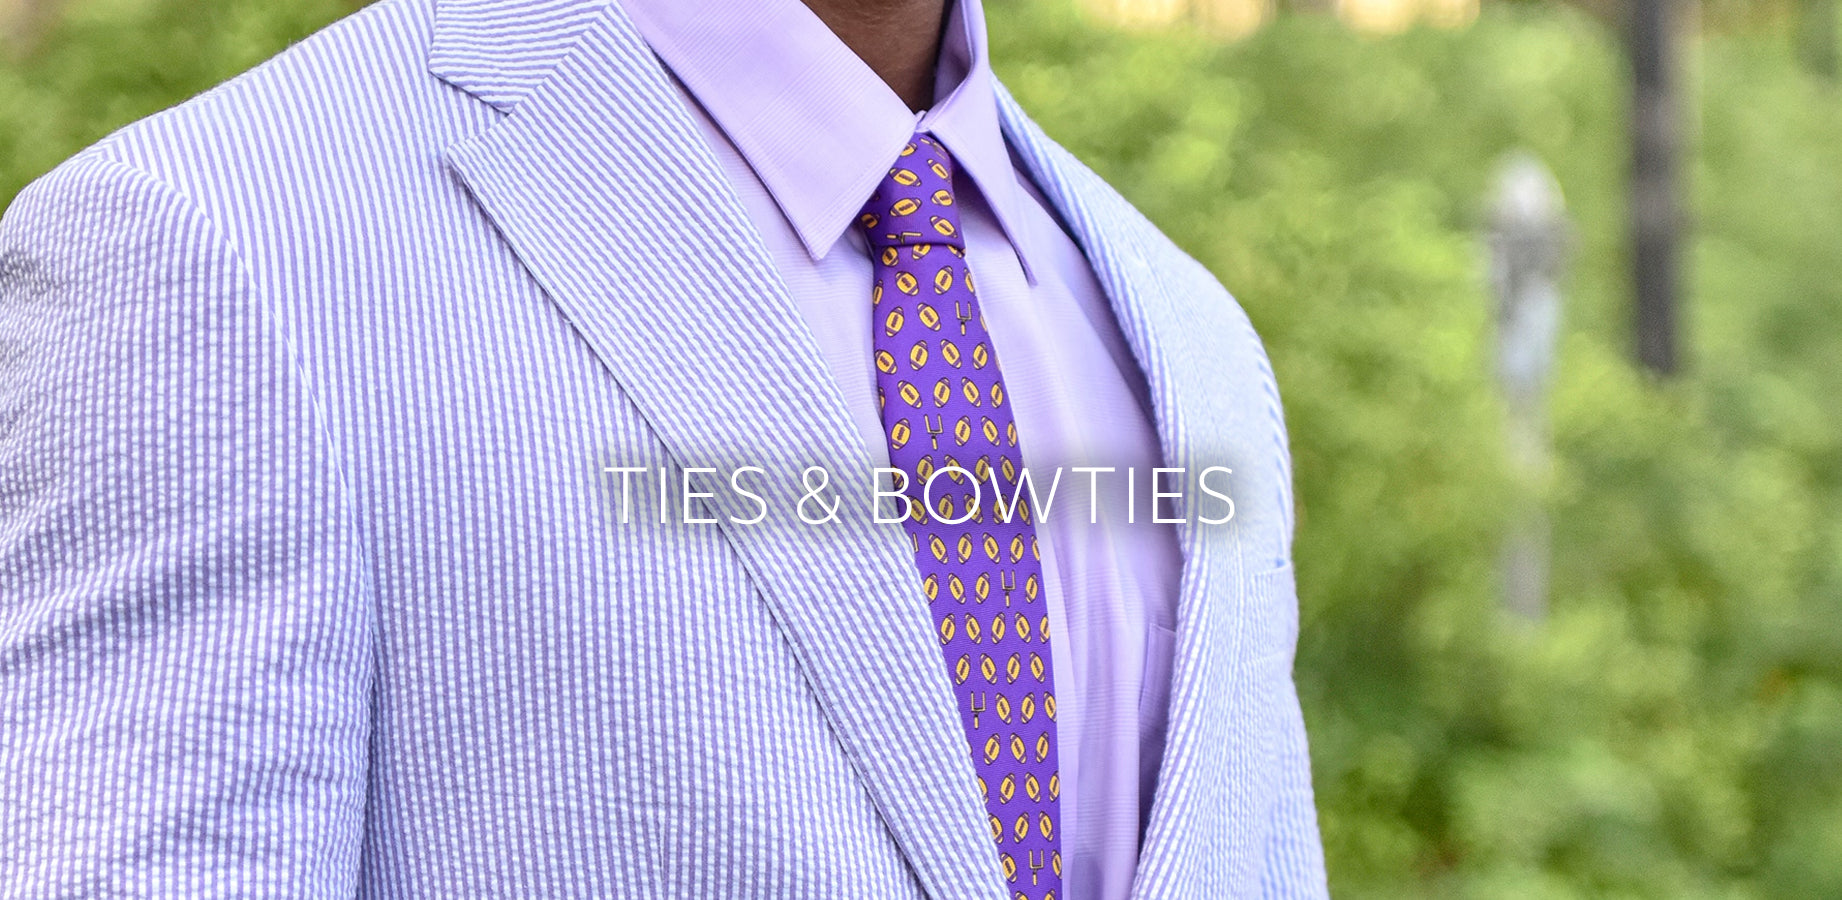 ALL TIES, BOWTIES & SQUARES